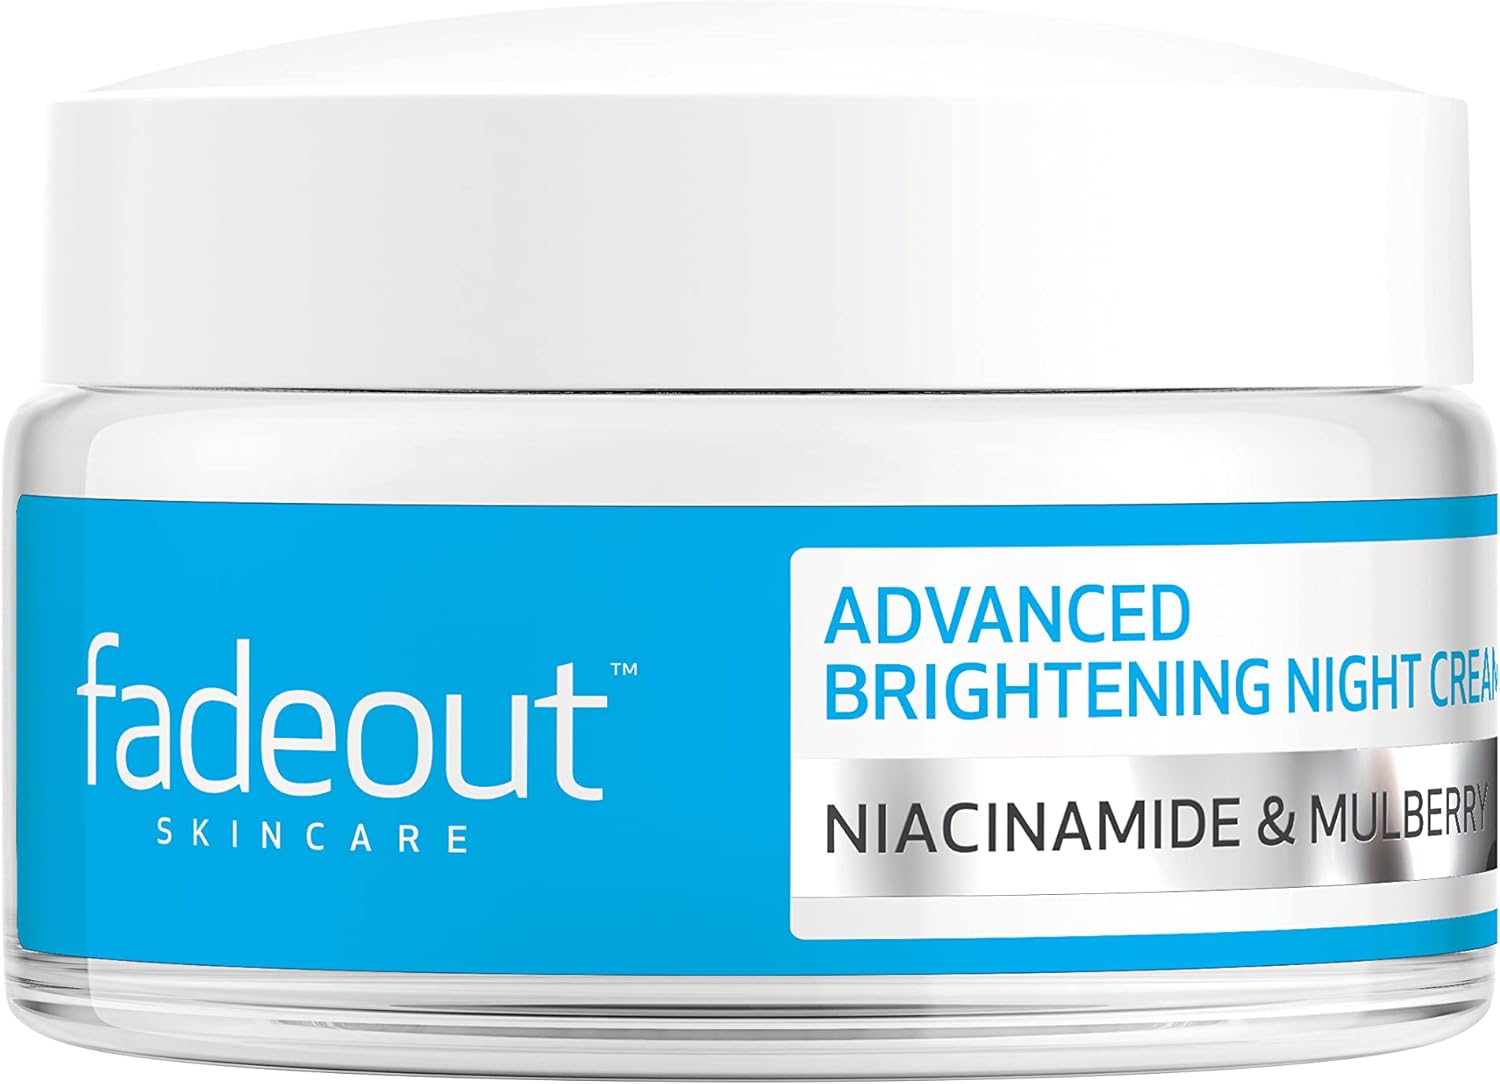 Fade Out Advanced Brightening Night Cream wit…